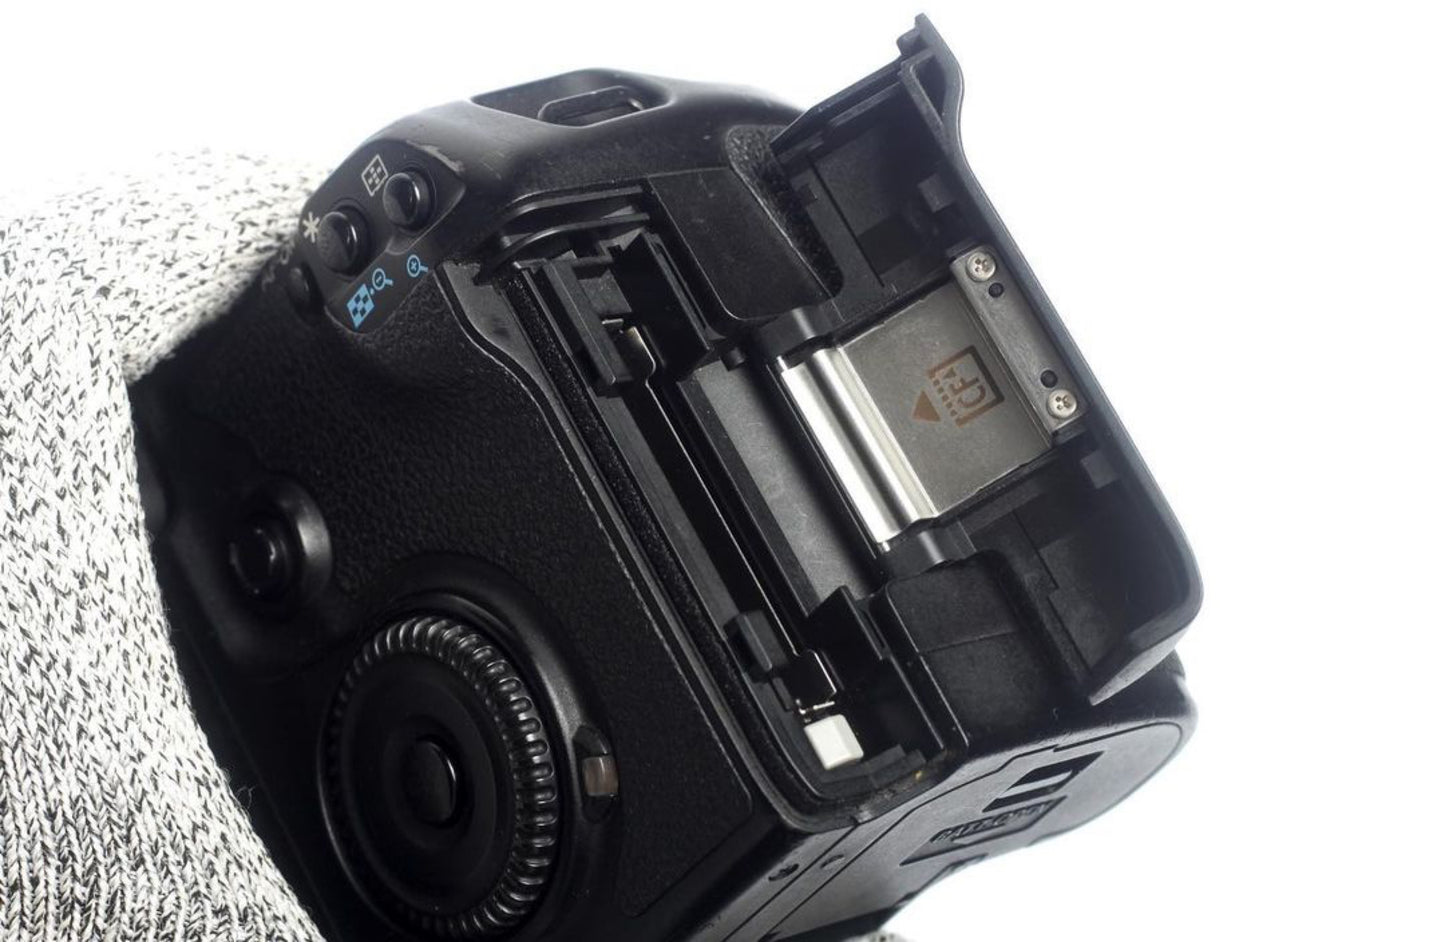 Used Canon EOS 40D DSLR Body Only